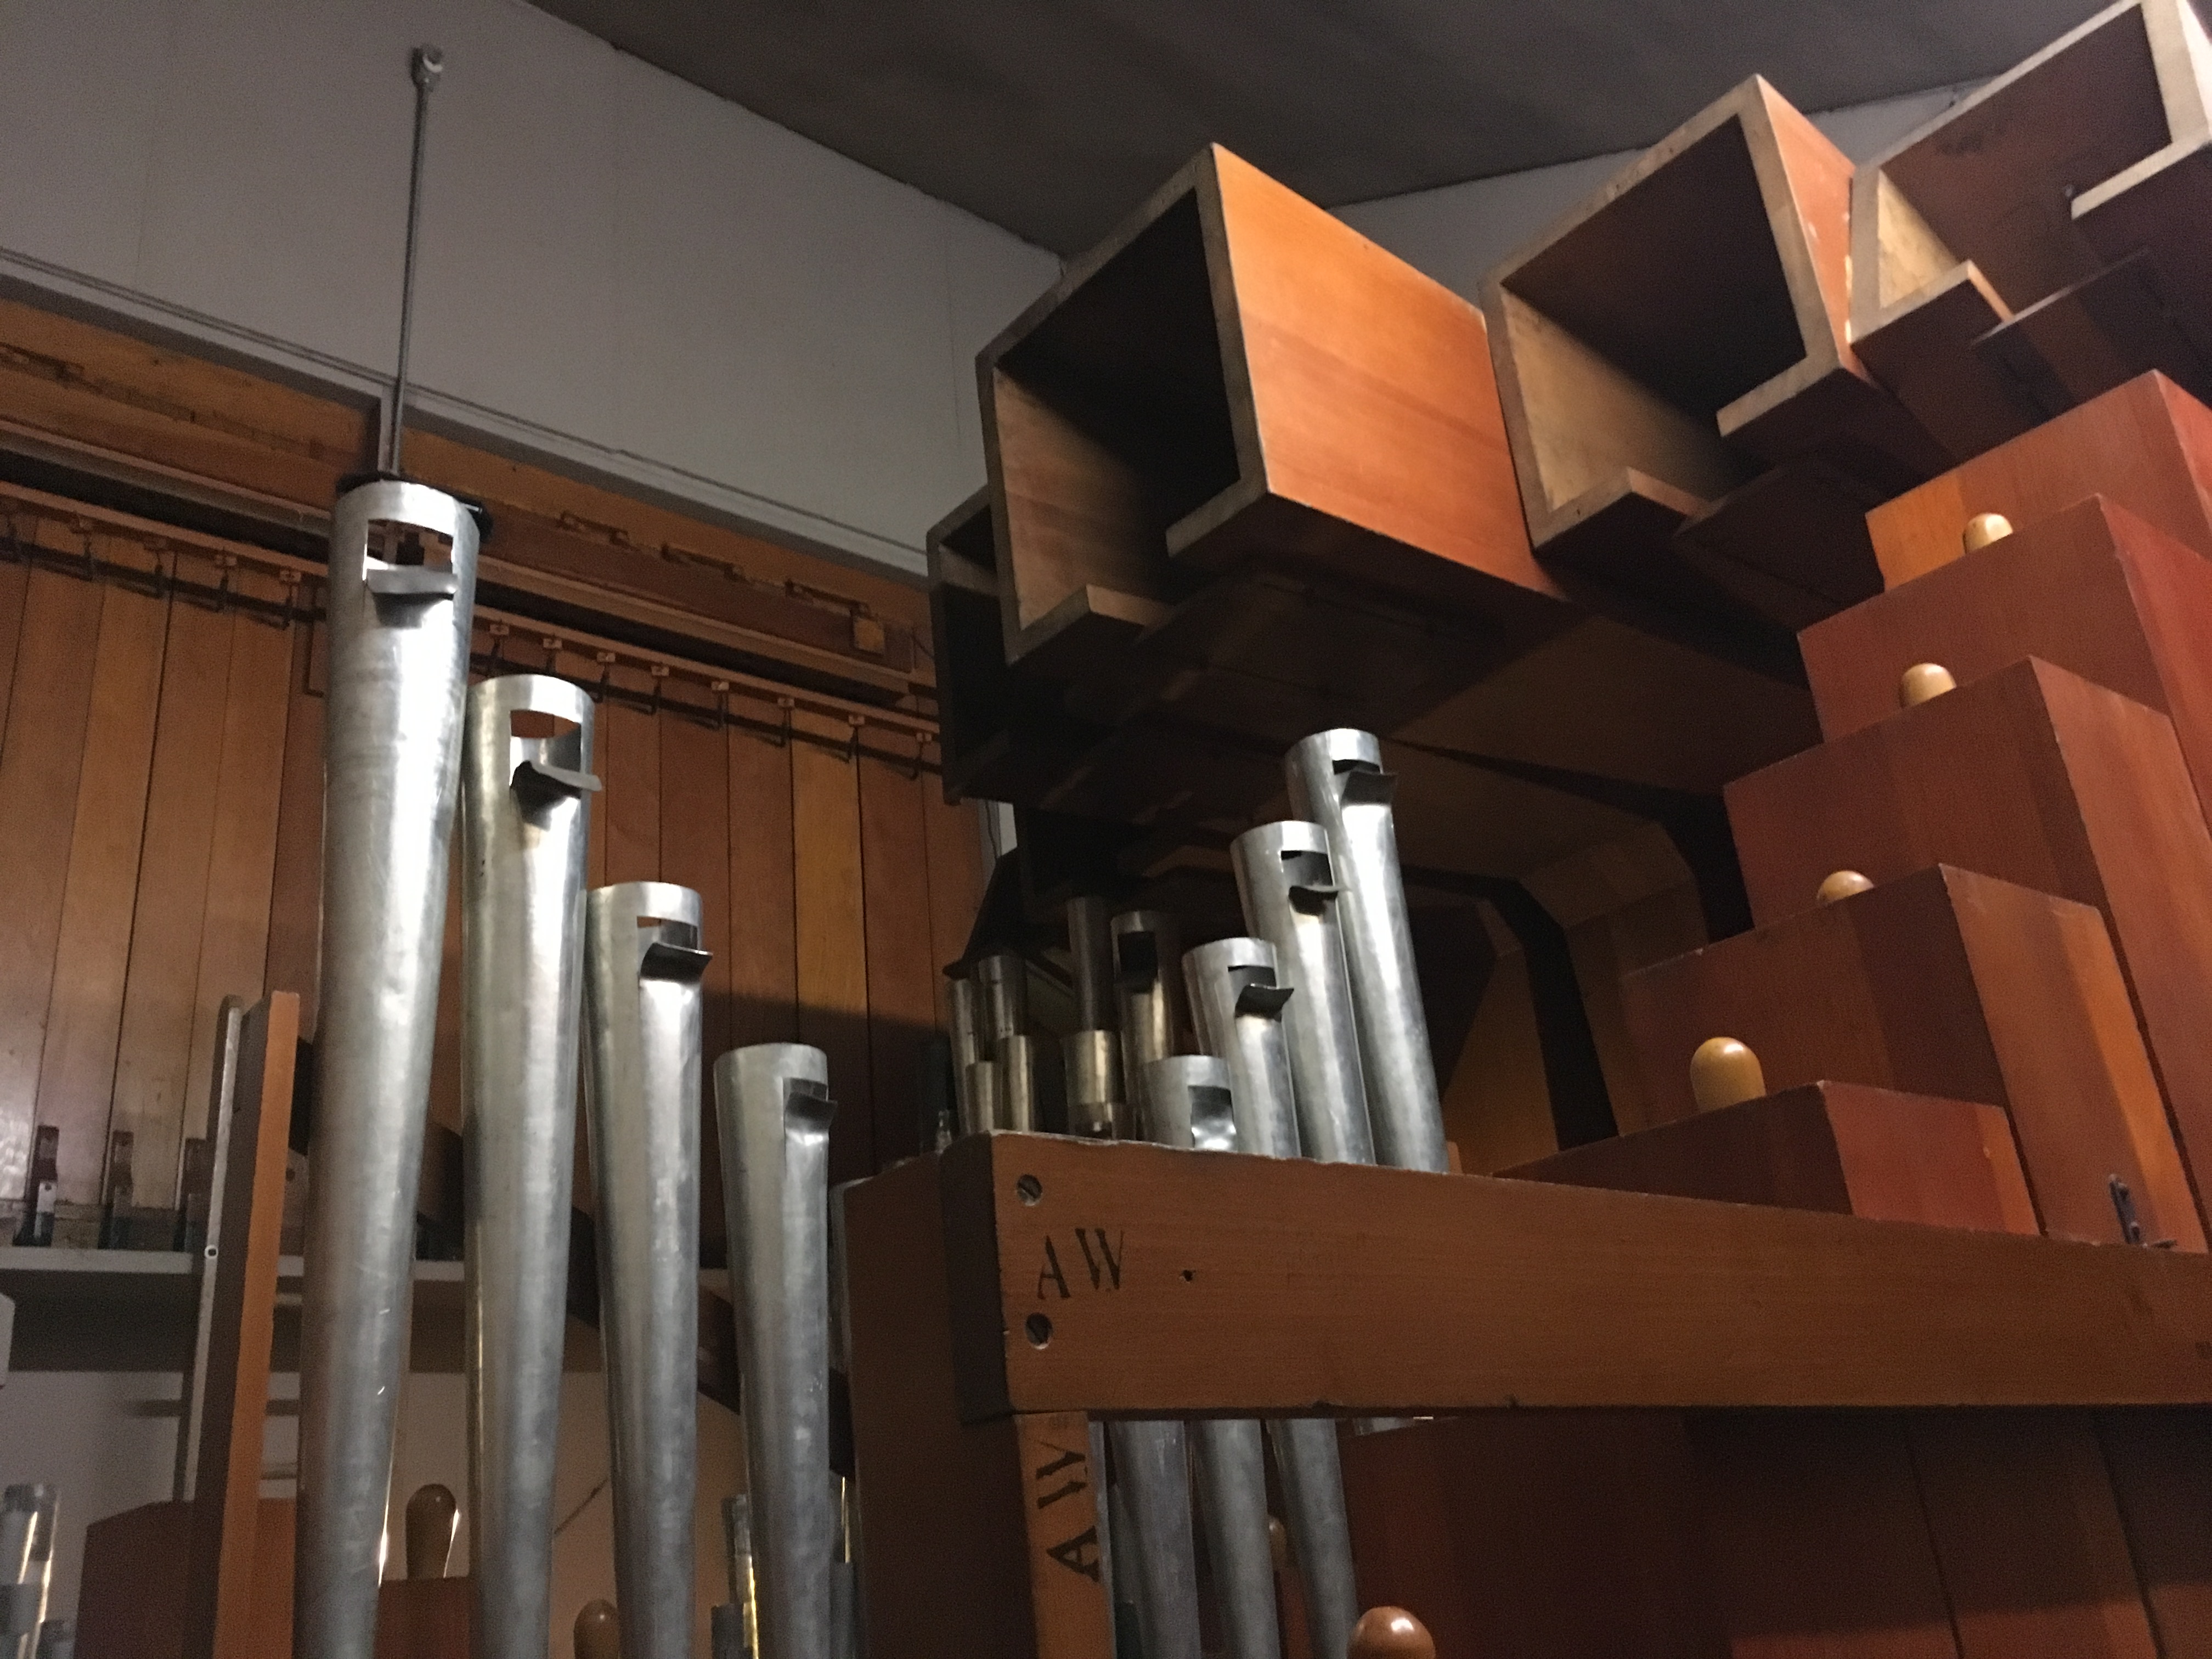 Pipes in one of the chambers for the theater organ at the Senate Theater.